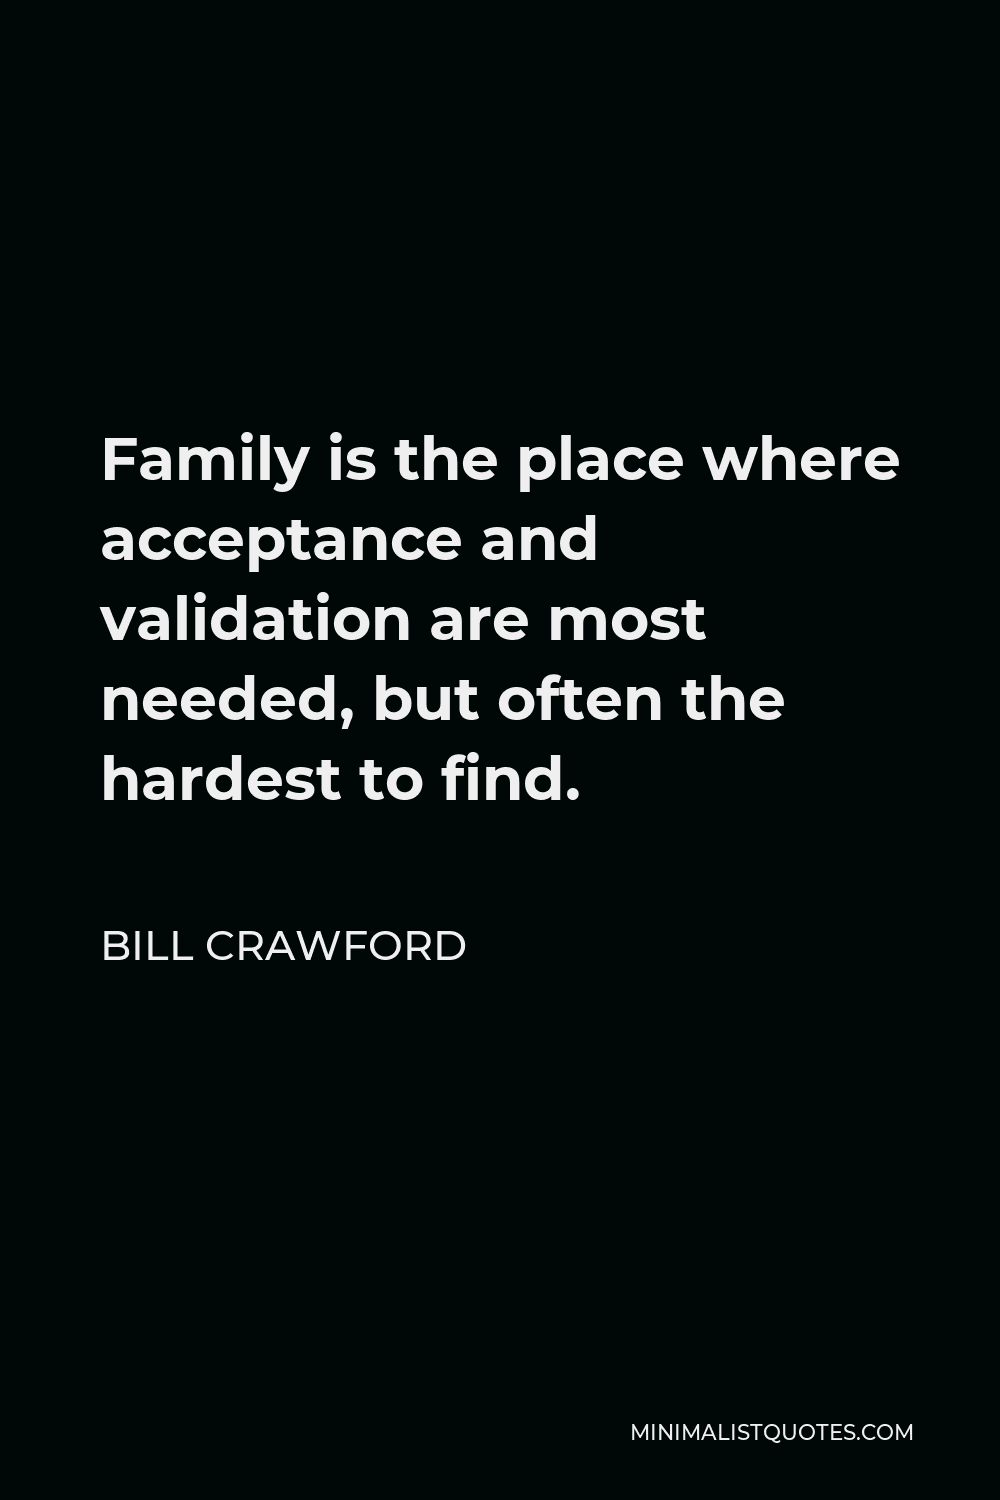 Bill Crawford Quote - Family is the place where acceptance and validation are most needed, but often the hardest to find.